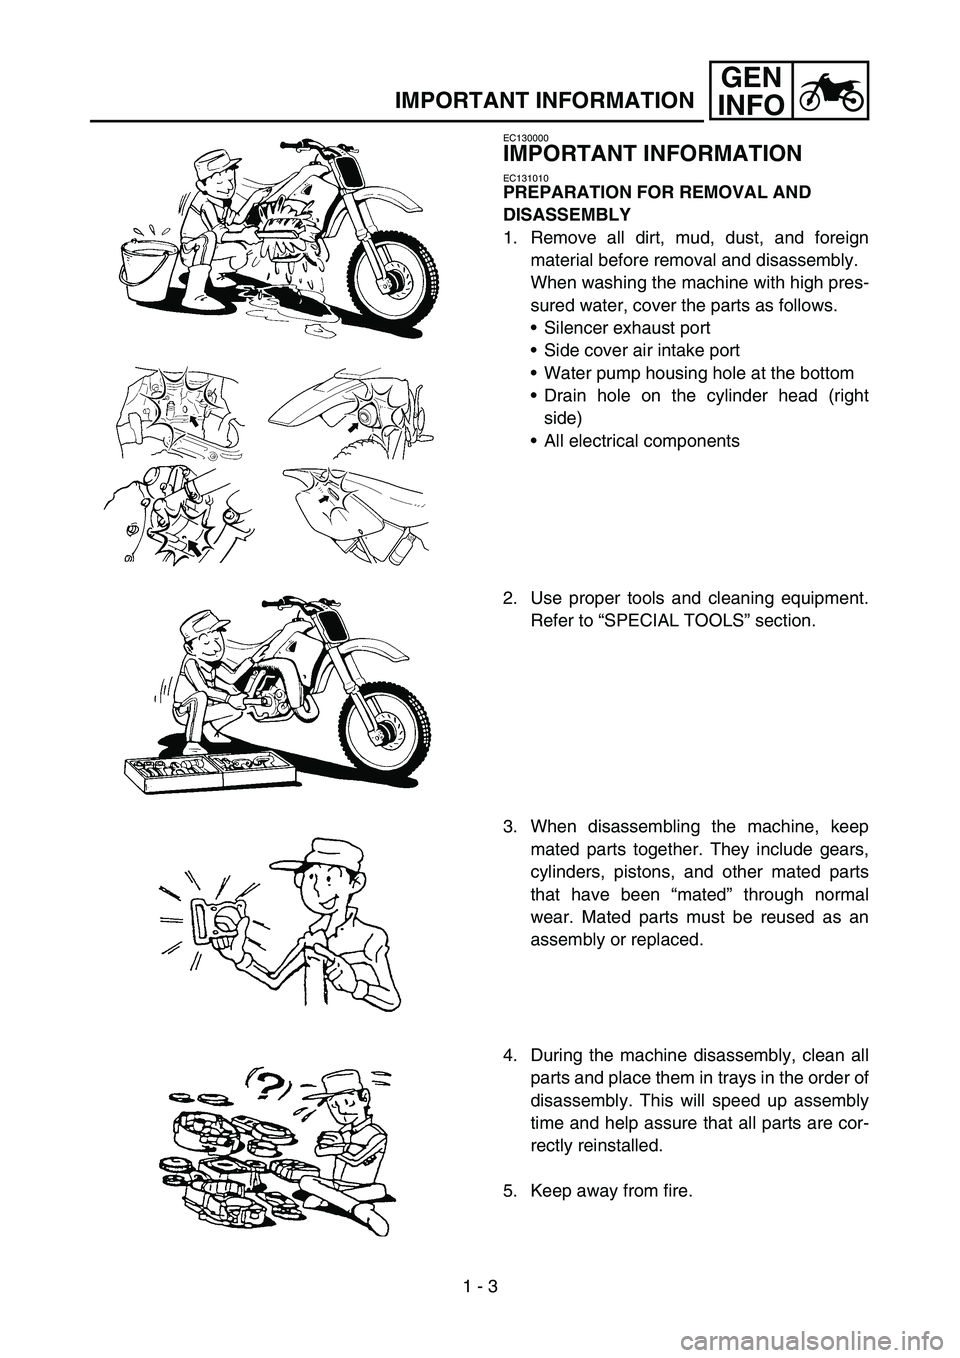 YAMAHA WR 450F 2005  Owners Manual 1 - 3
GEN
INFO
IMPORTANT INFORMATION
EC130000
IMPORTANT INFORMATION
EC131010
PREPARATION FOR REMOVAL AND 
DISASSEMBLY
1. Remove all dirt, mud, dust, and foreign
material before removal and disassembly